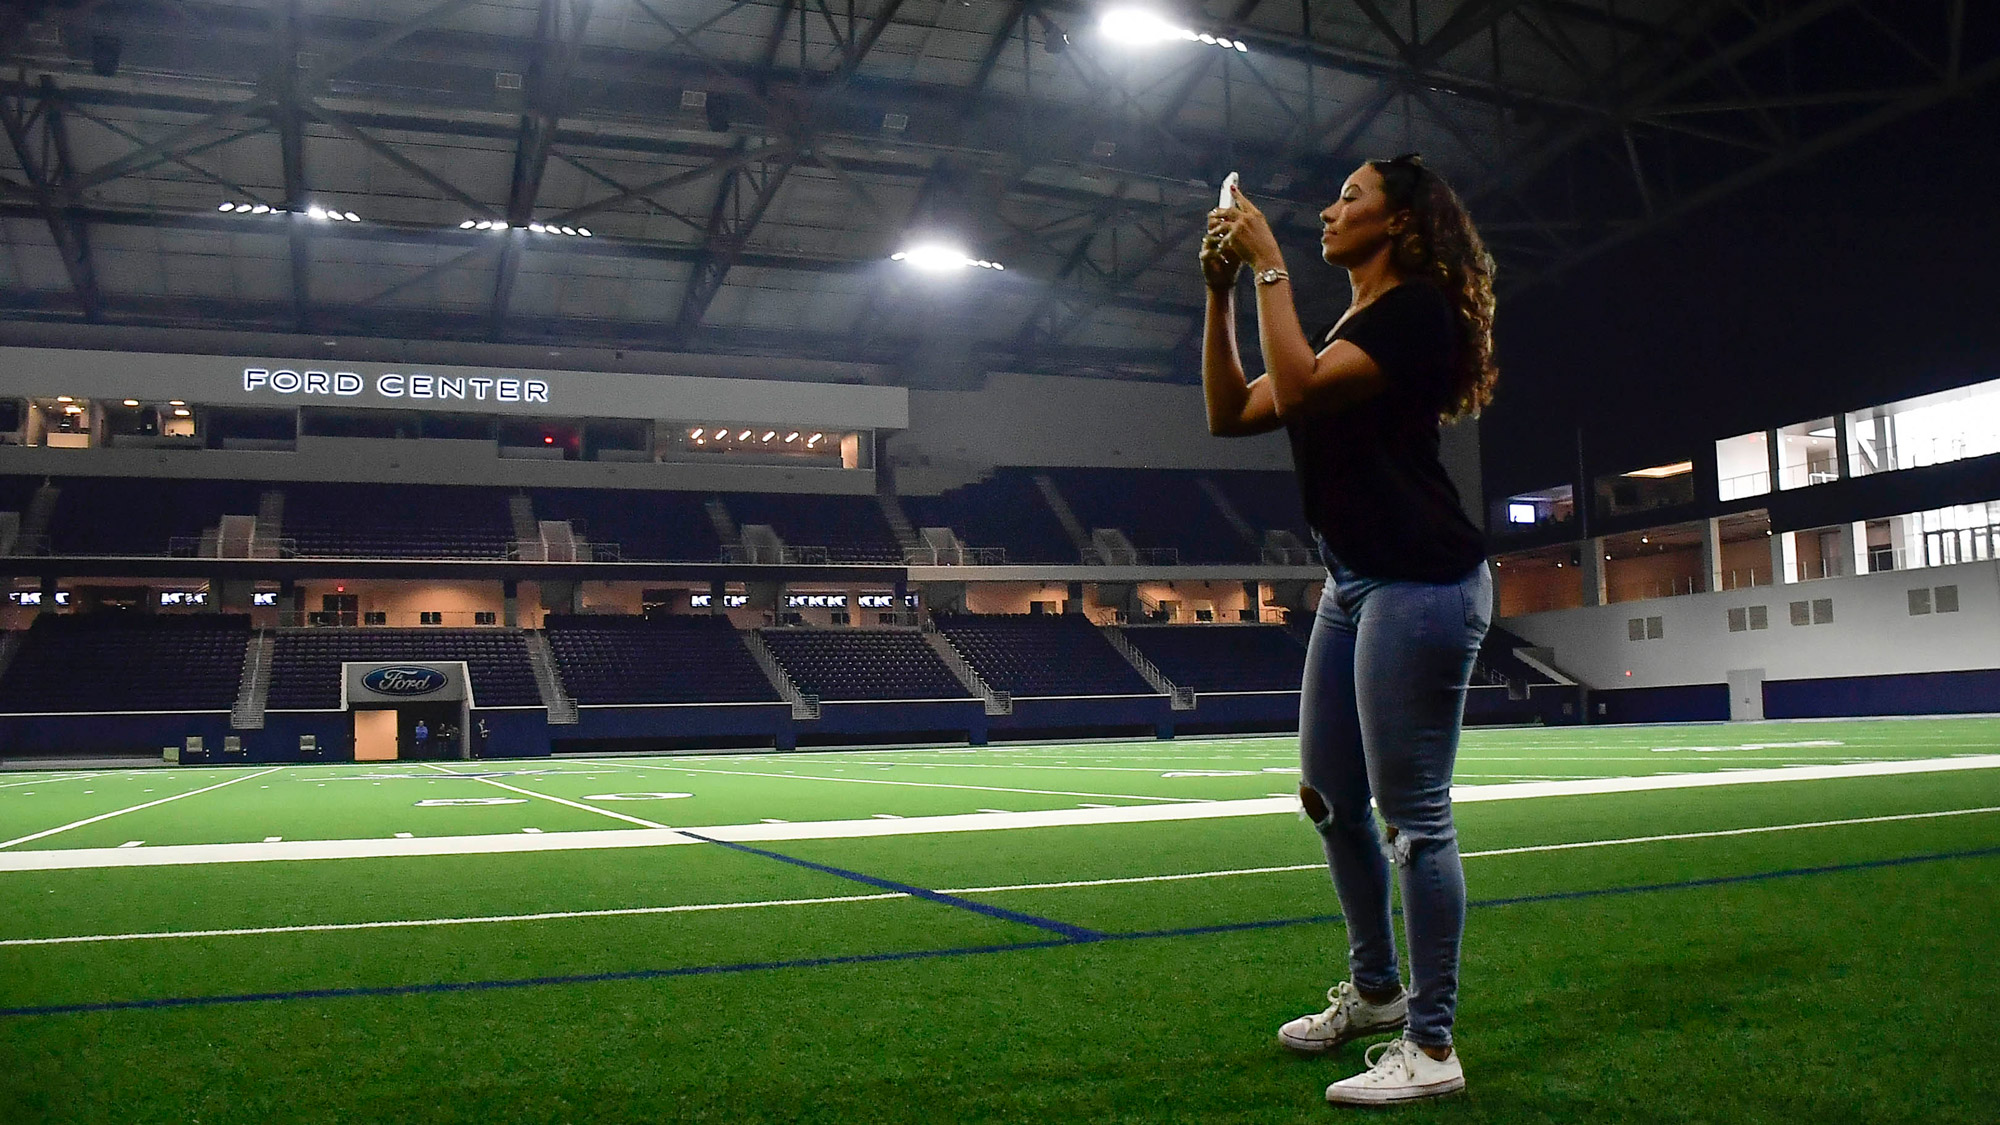 Cheyenne Woods Snaps a Photo Inside the Ford Center